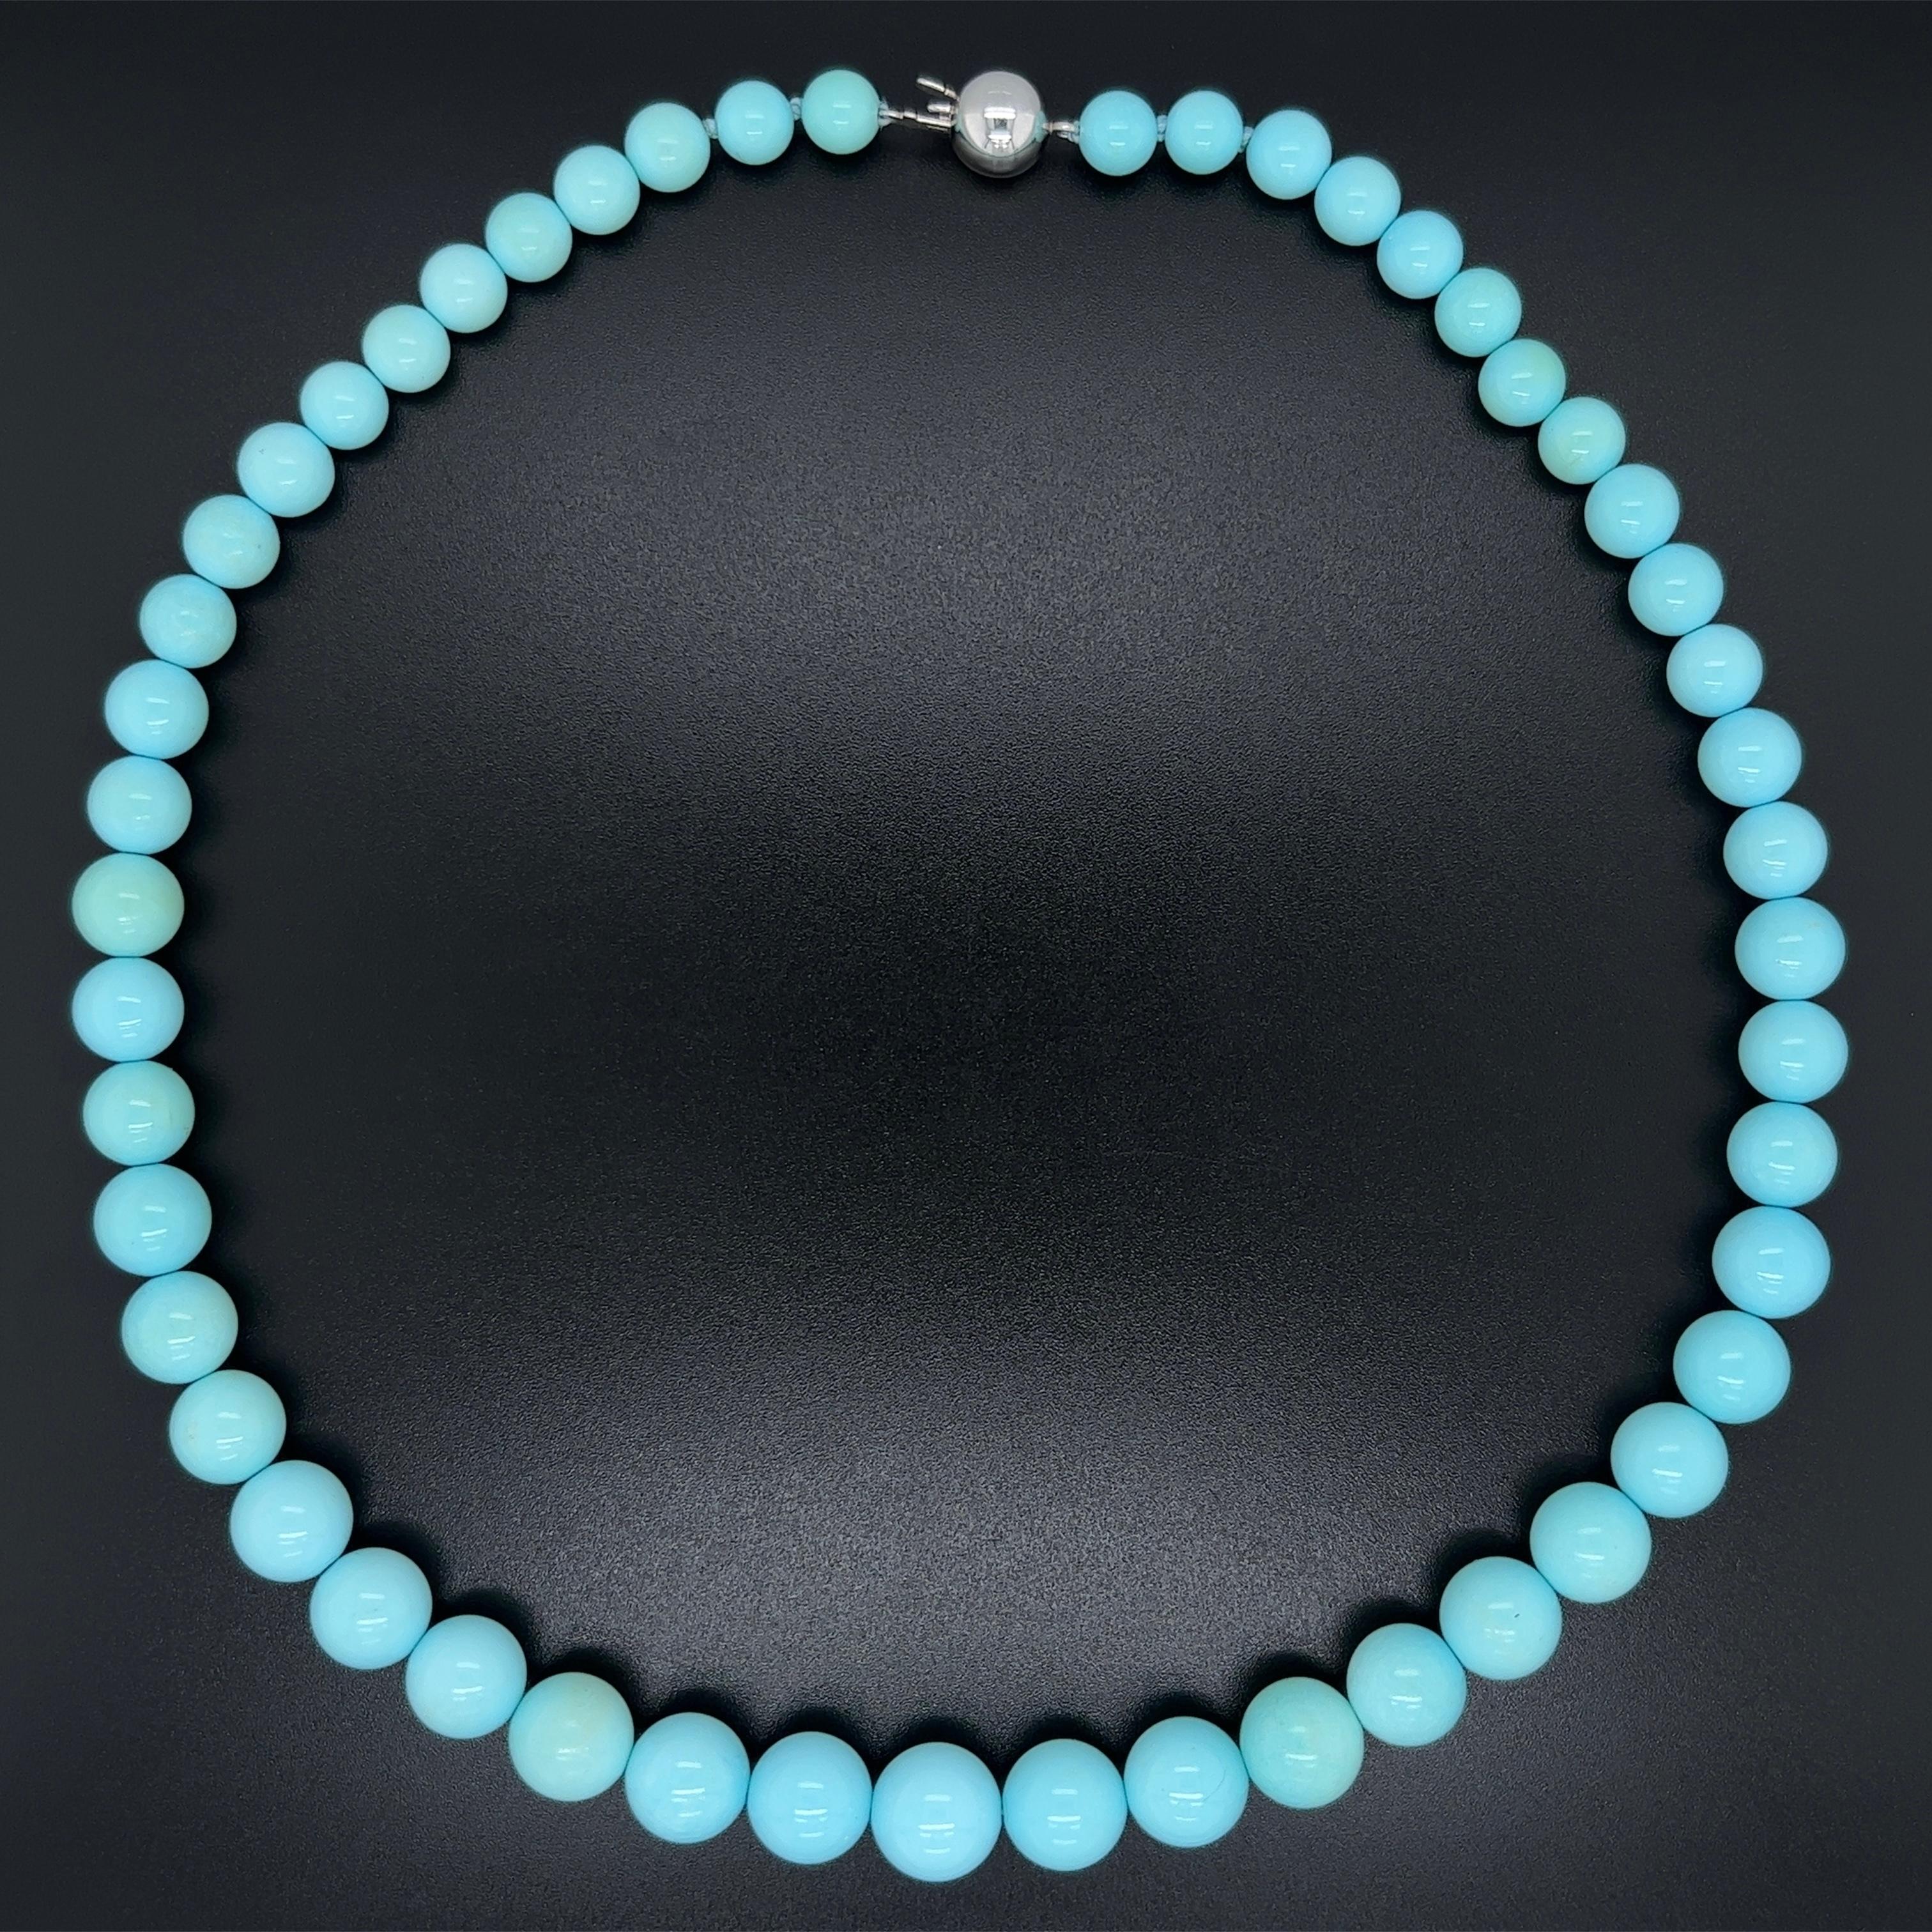 Simply Beautiful! 51 Round Persian Turquoise Beads Necklace. Each measuring approx. 6.15mm-10.10, held by a 18K White Gold clasp. The necklace measures approx. 16” long. More Beautiful in real time! Classic and Chic...A sure to be admired piece